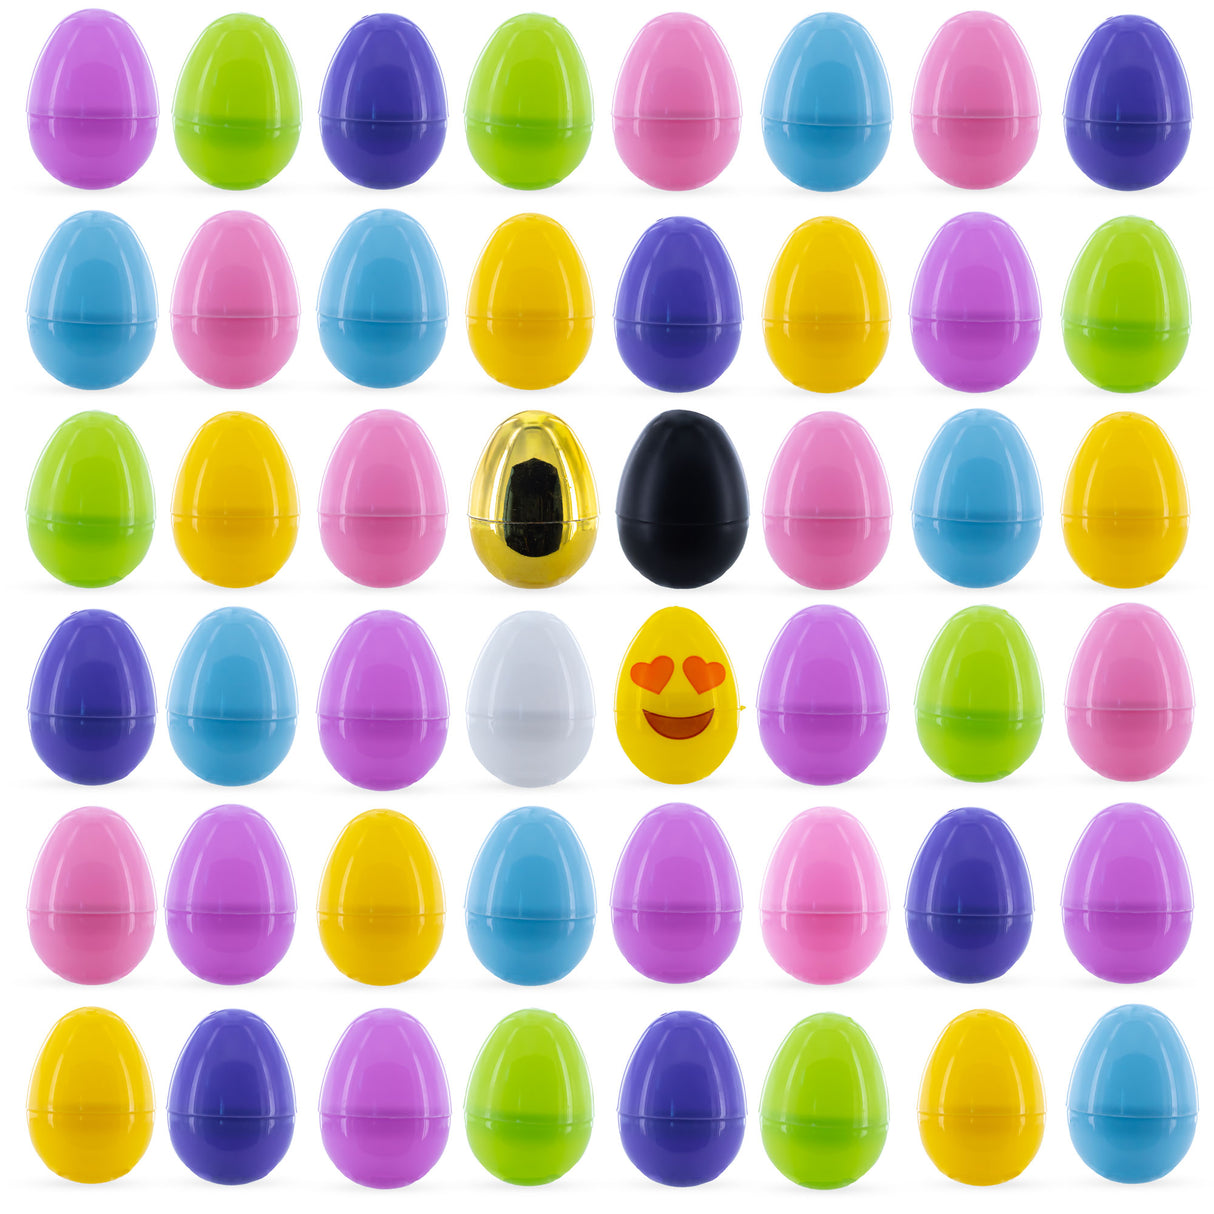 Plastic Set of 48 Plastic Easter Eggs in Pastel, Gold, White, and Black 2.25 Inches in Multi color Oval